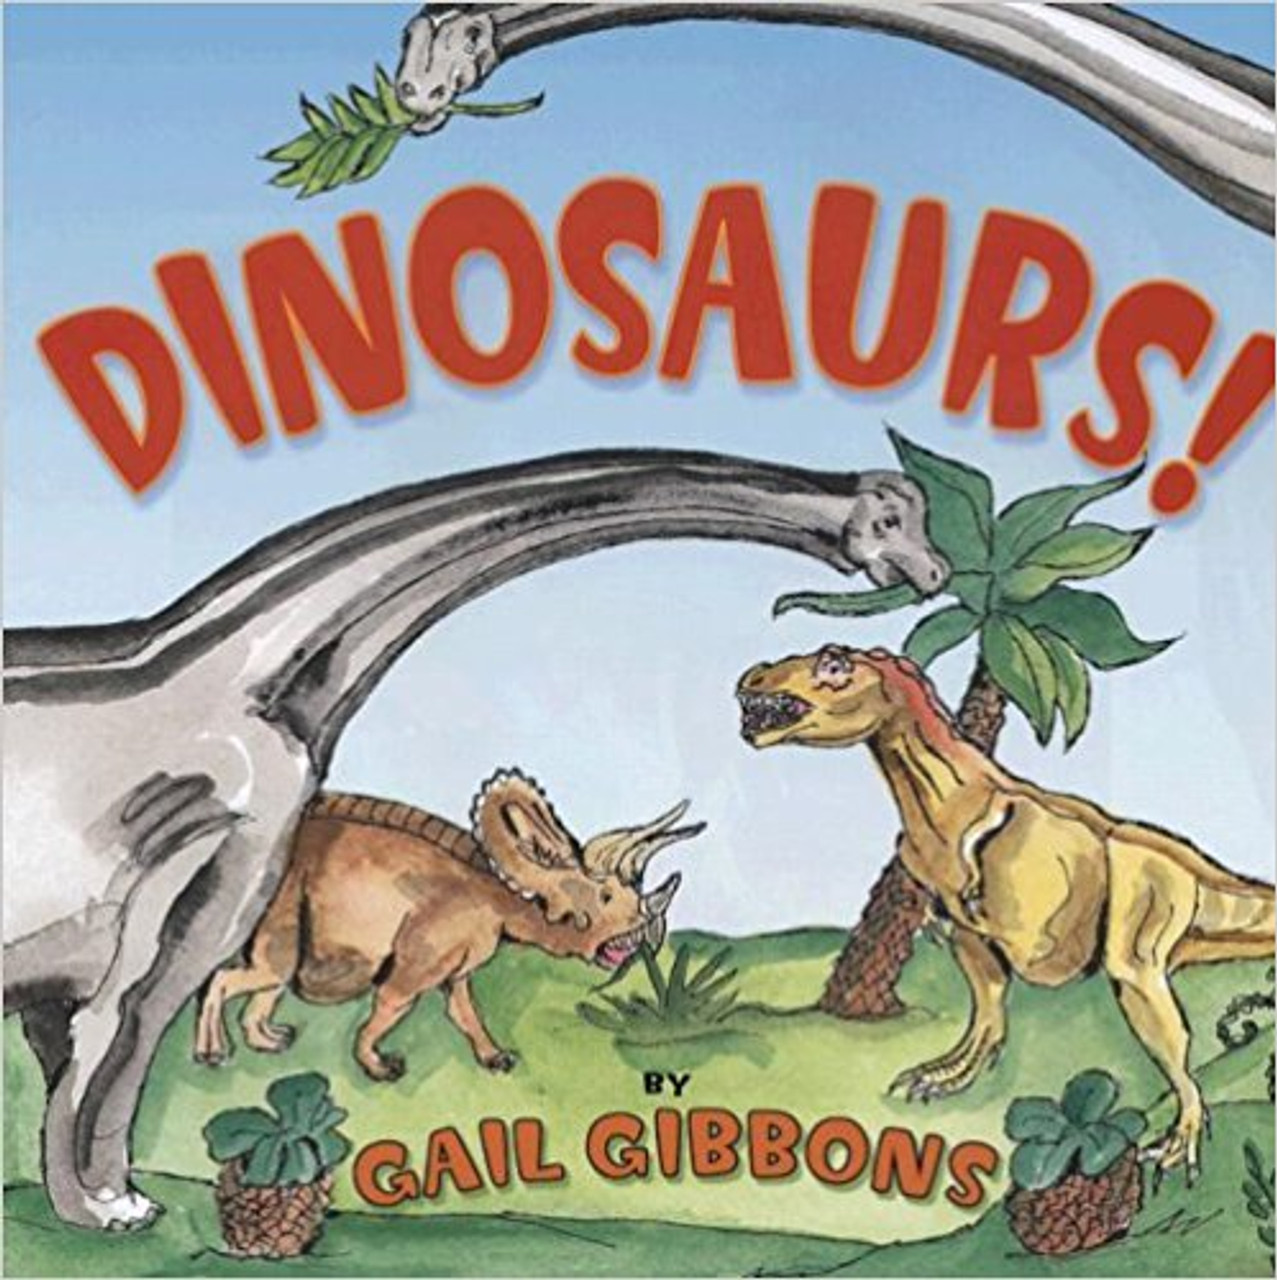  Dinosaurs ruled Earth for millions of years. Gibbons's simple yet informative text and vividly detailed illustrations depict the most up-to-date information available about these magnificent creatures.